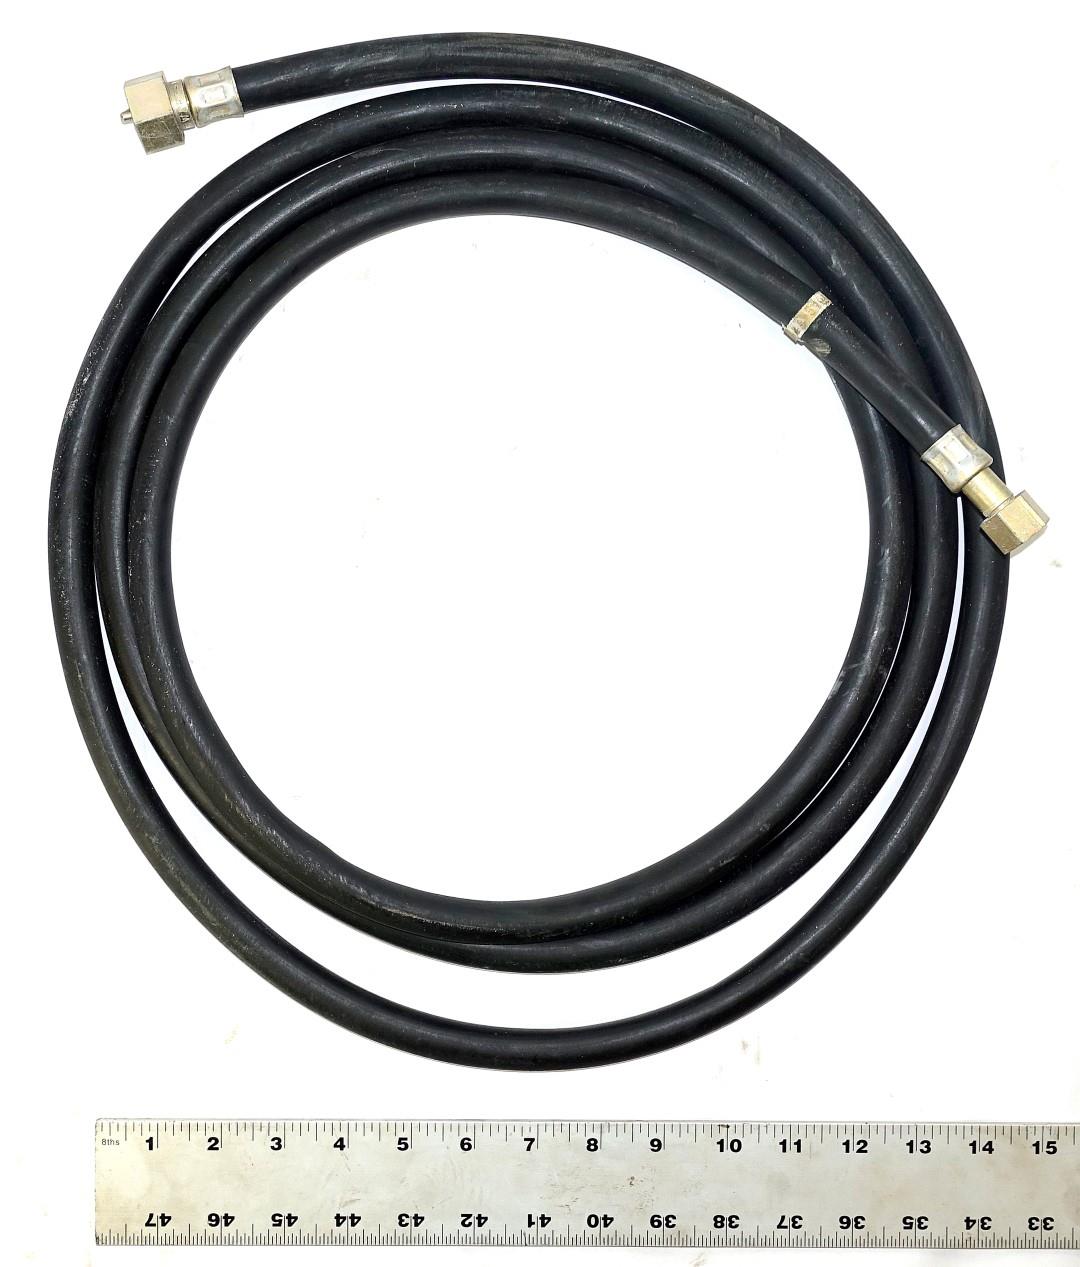 SP-2033 | 6680-00-507-9980 Speedometer Cable (2) (Large).JPG